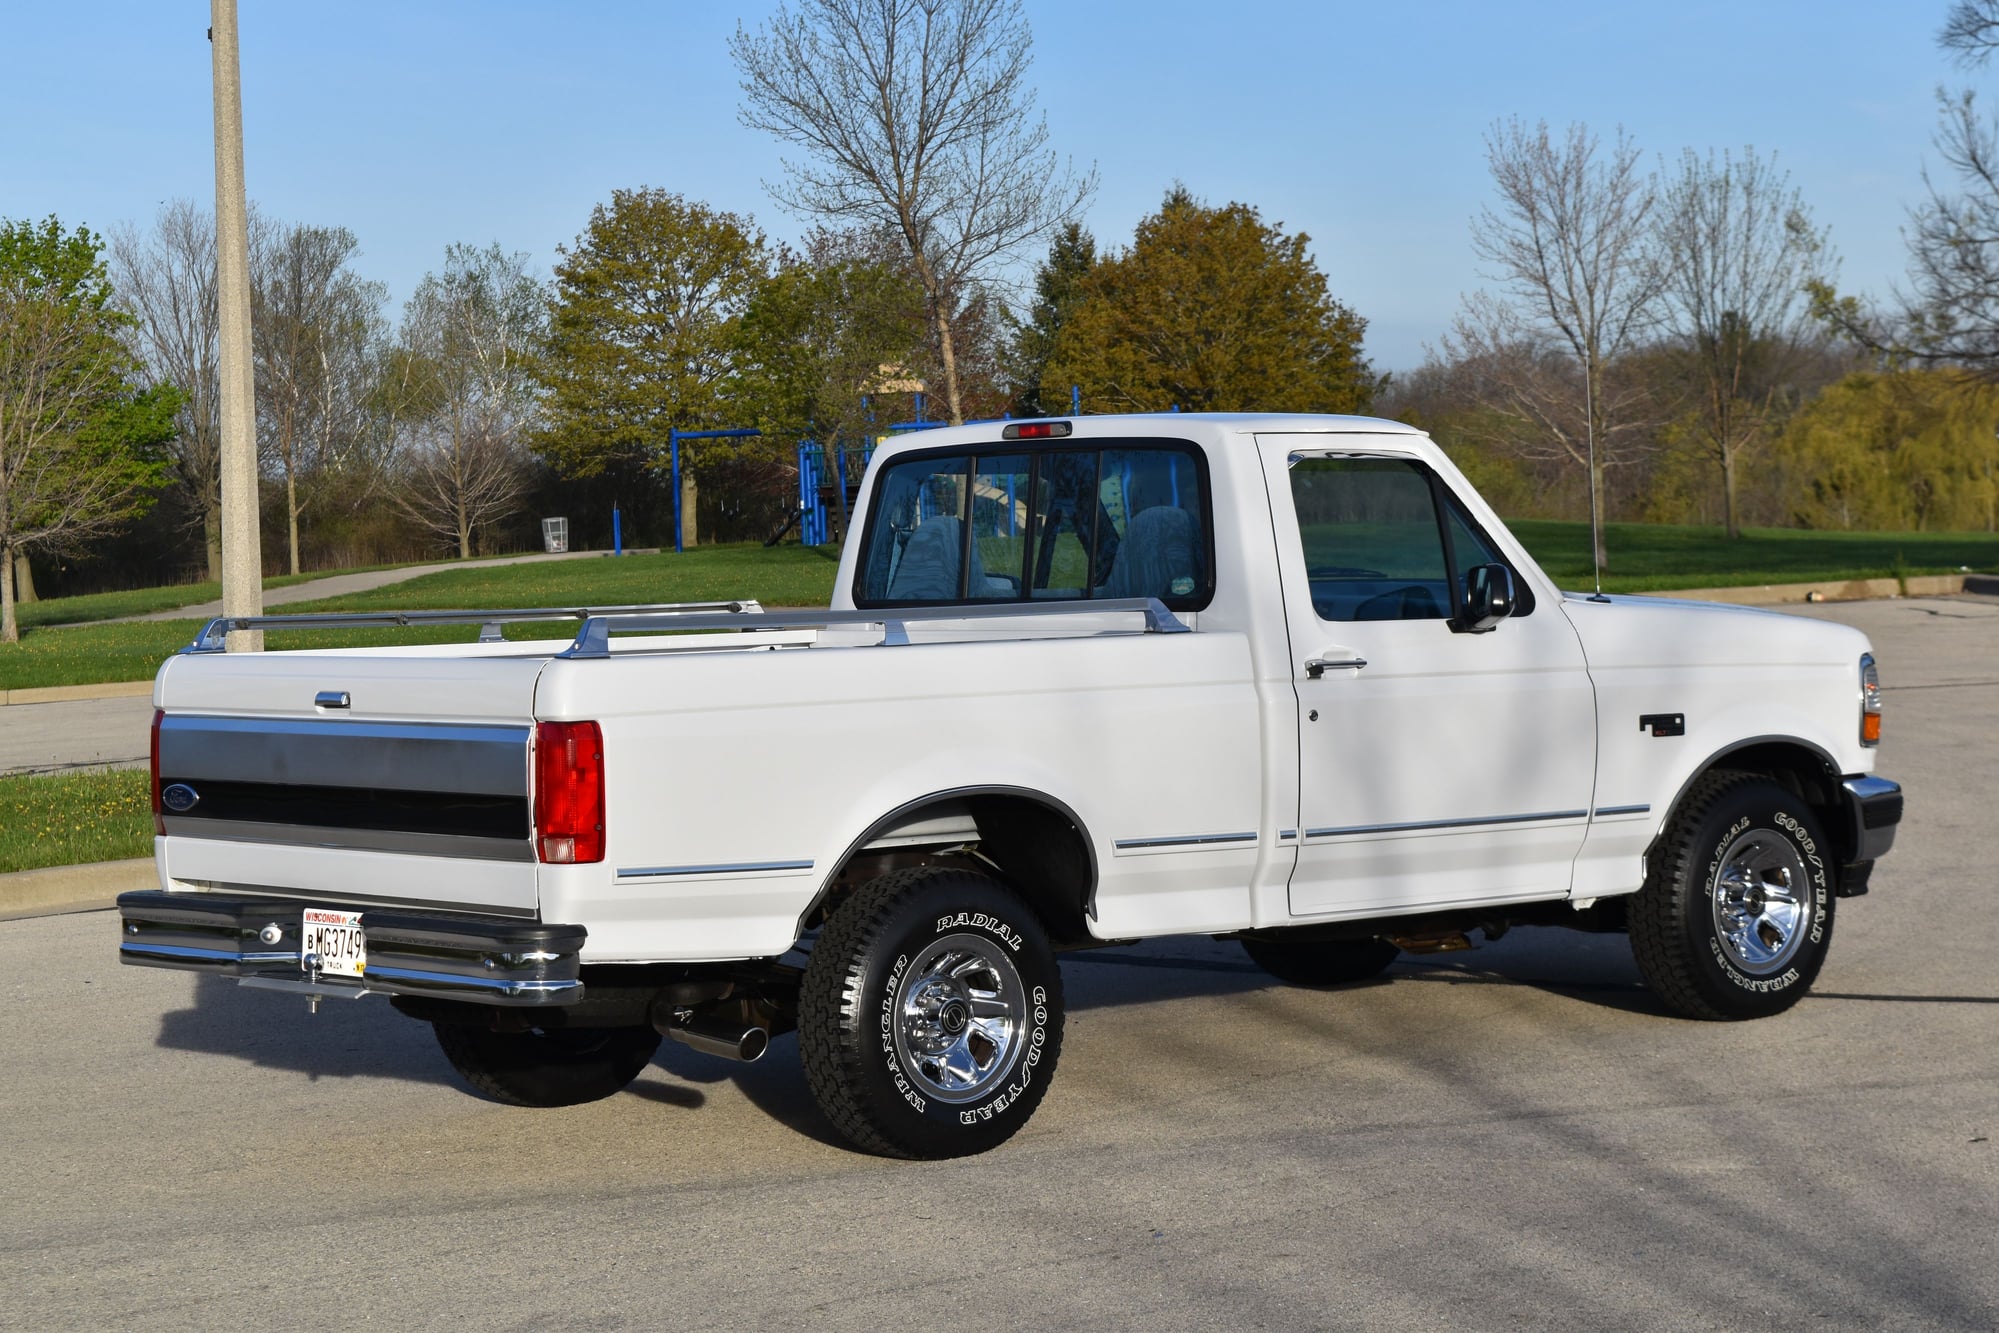 Year: 1996 Make: Ford Model: F-150 Price: $14900 Mileage: 52200 Color: Whit...